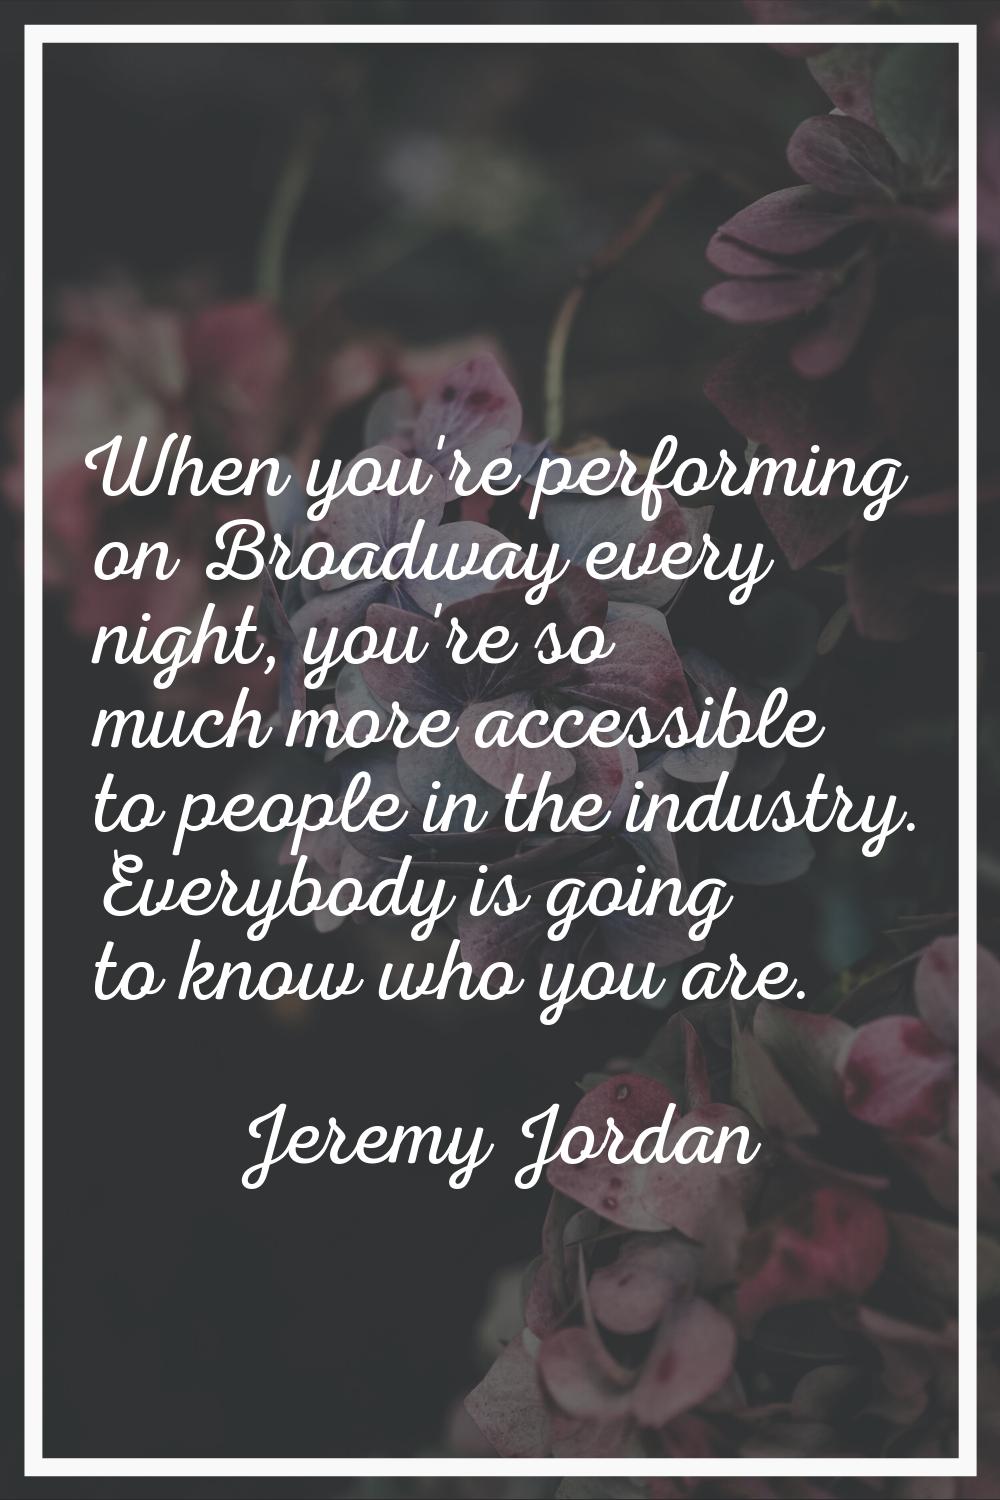 When you're performing on Broadway every night, you're so much more accessible to people in the ind